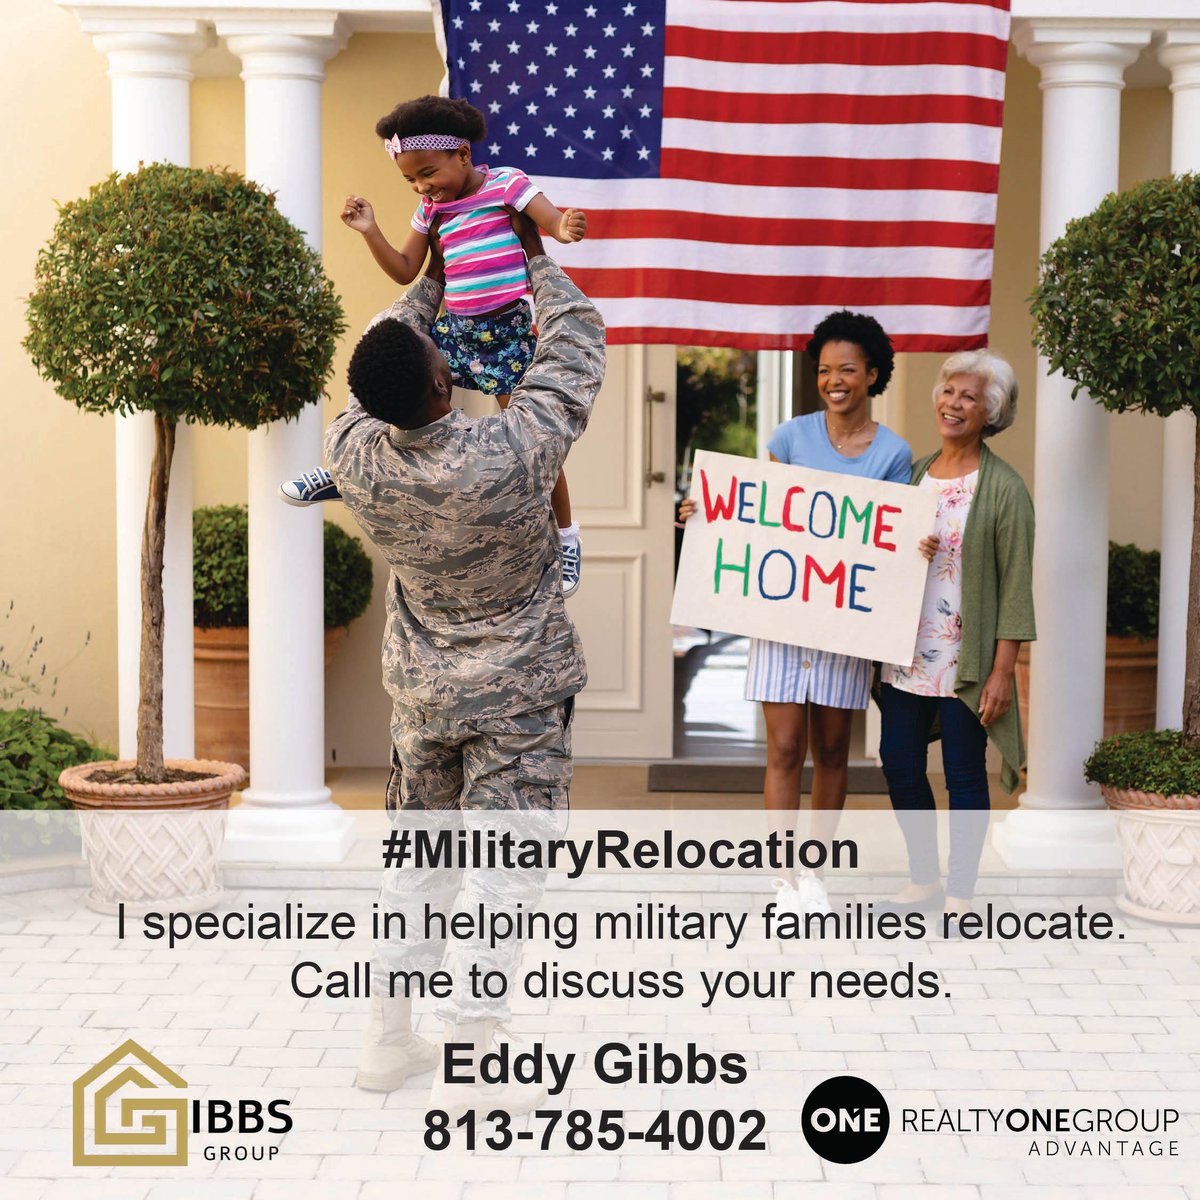 Specializing in helping military families find their home base.
Call or text 813-785-4002 and let's chat!

#militaryrelocation #tampabayrealestate #tampabay #tampabayrealtor #tamparealtor #tamparealestate #tampa #realestate #floridarealestate #realtor #floridarealtor...